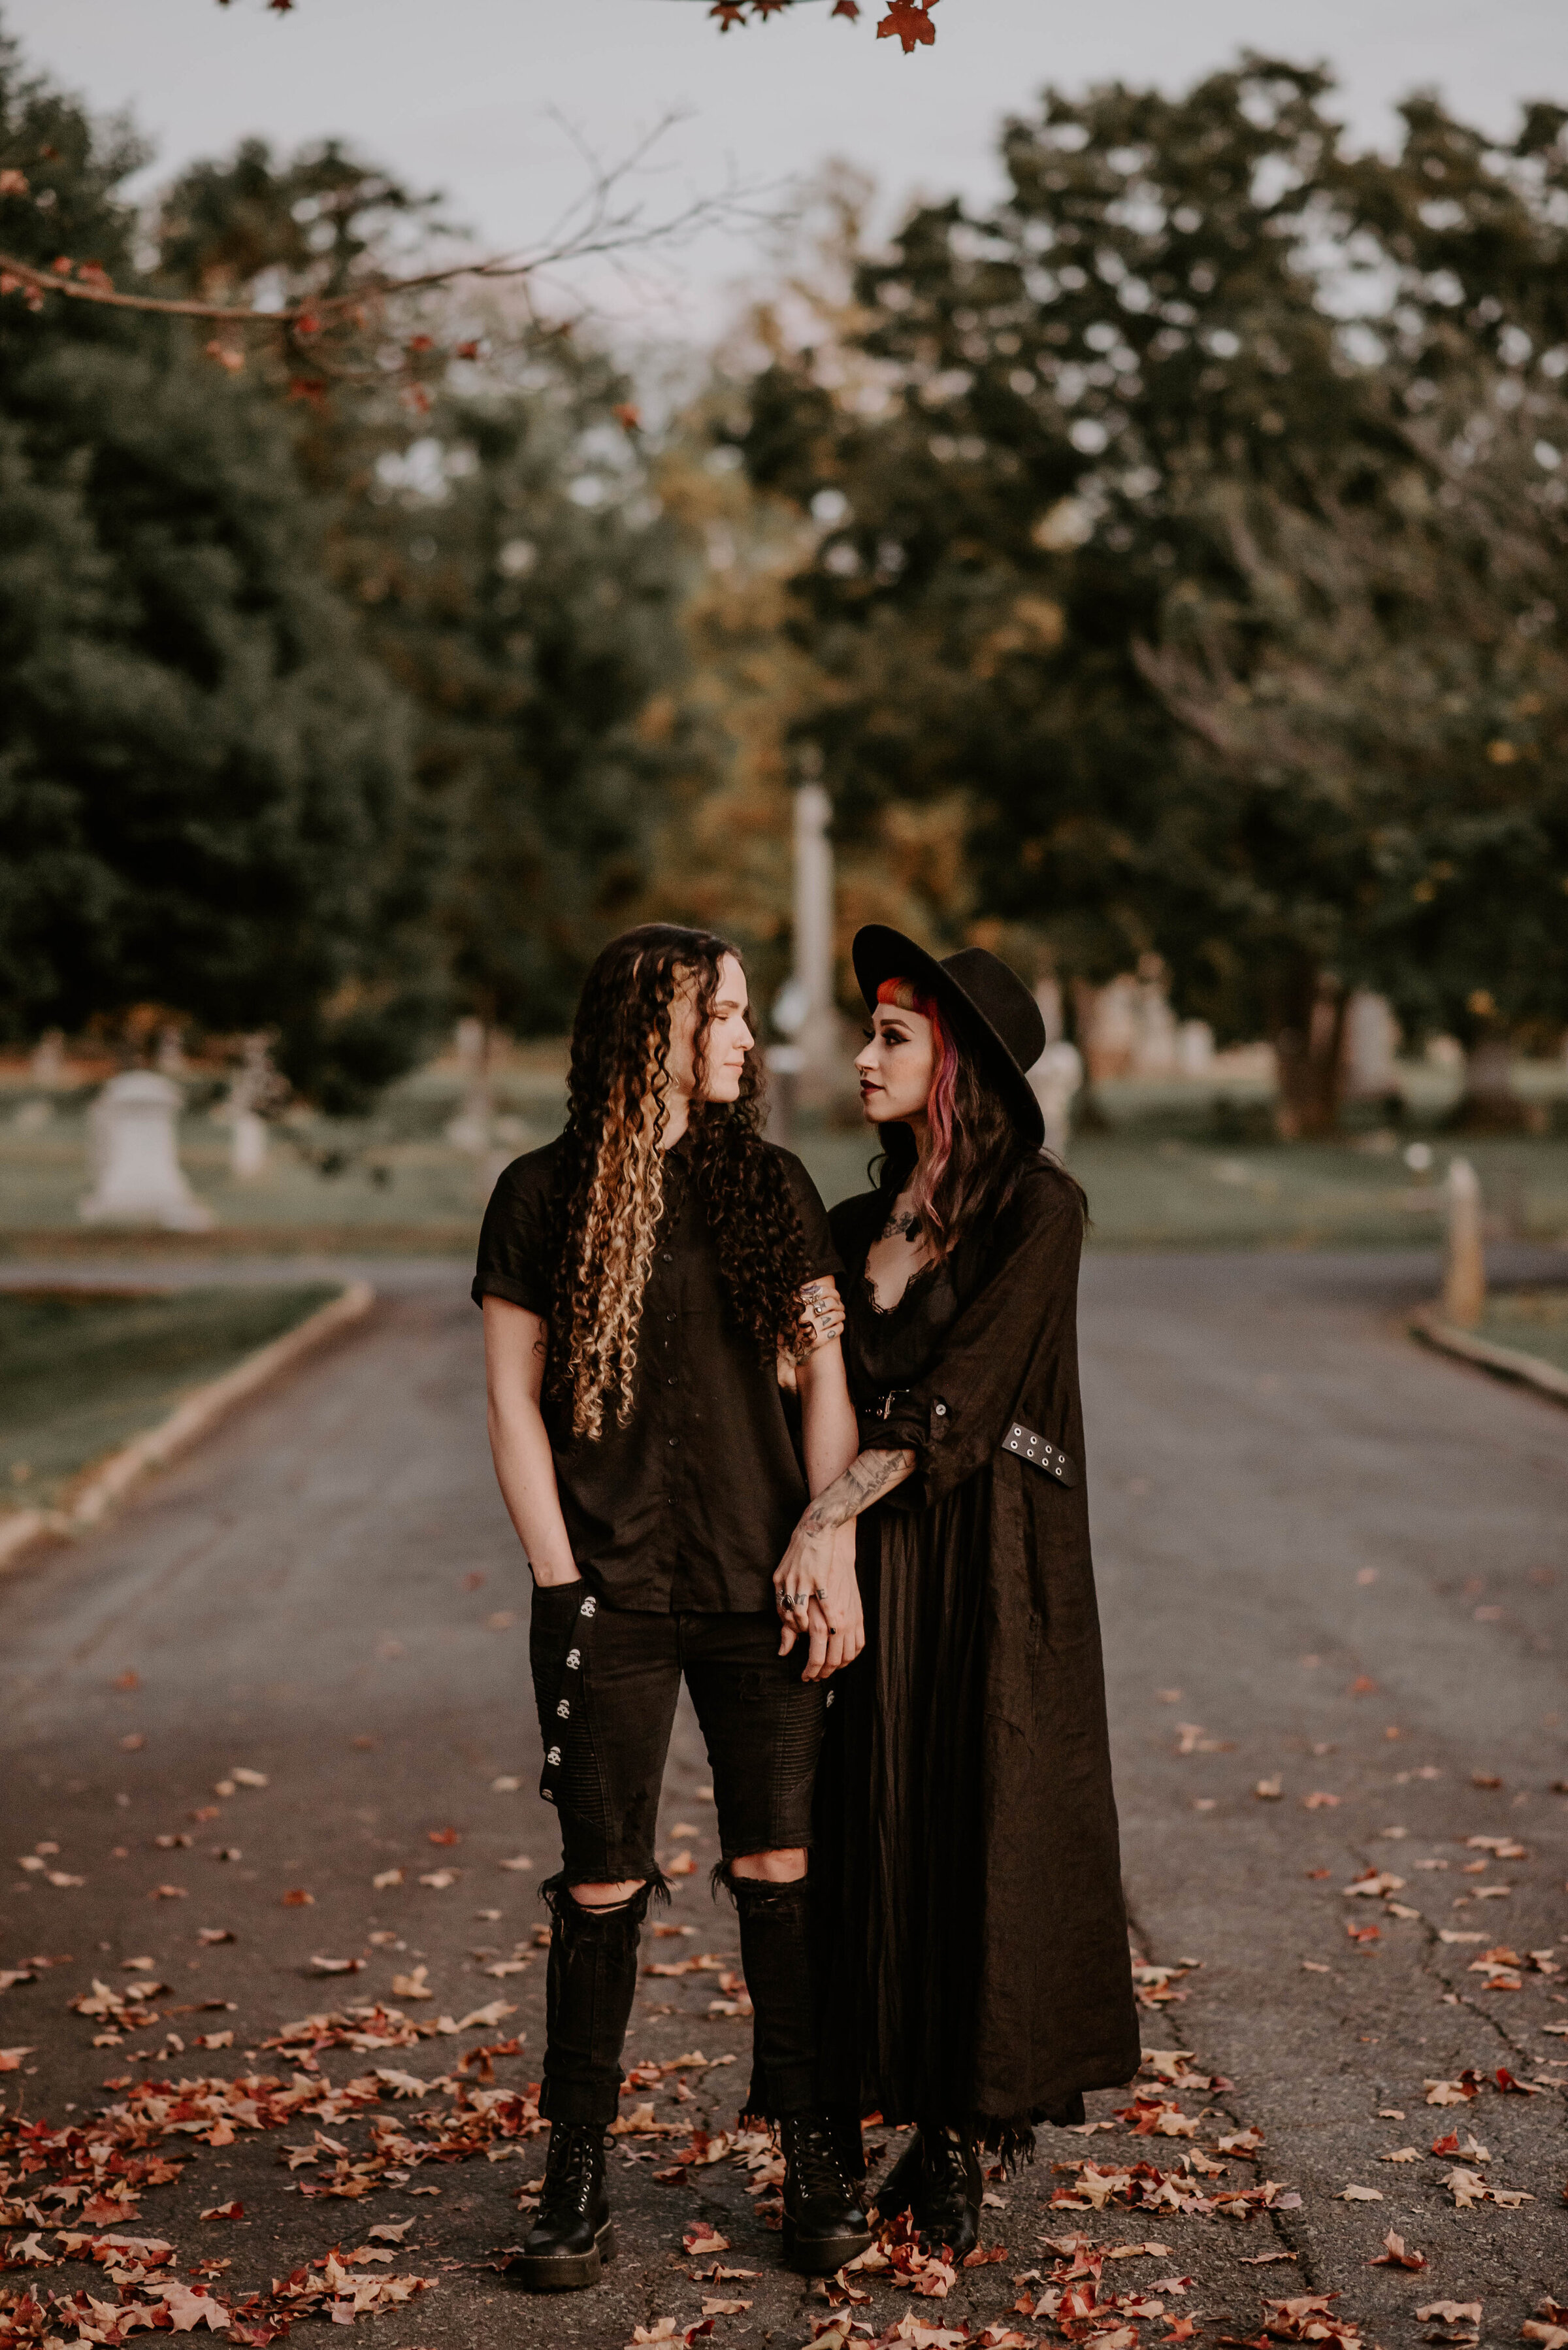 Charlotte NC Elopement Wedding Photographer Photojournalism Editorial Documentary Candid Photography Asheville Boone Raleigh Winston Salem Greensboro Halloween Engagement Session Graveyard Spooky LGBT Friendly